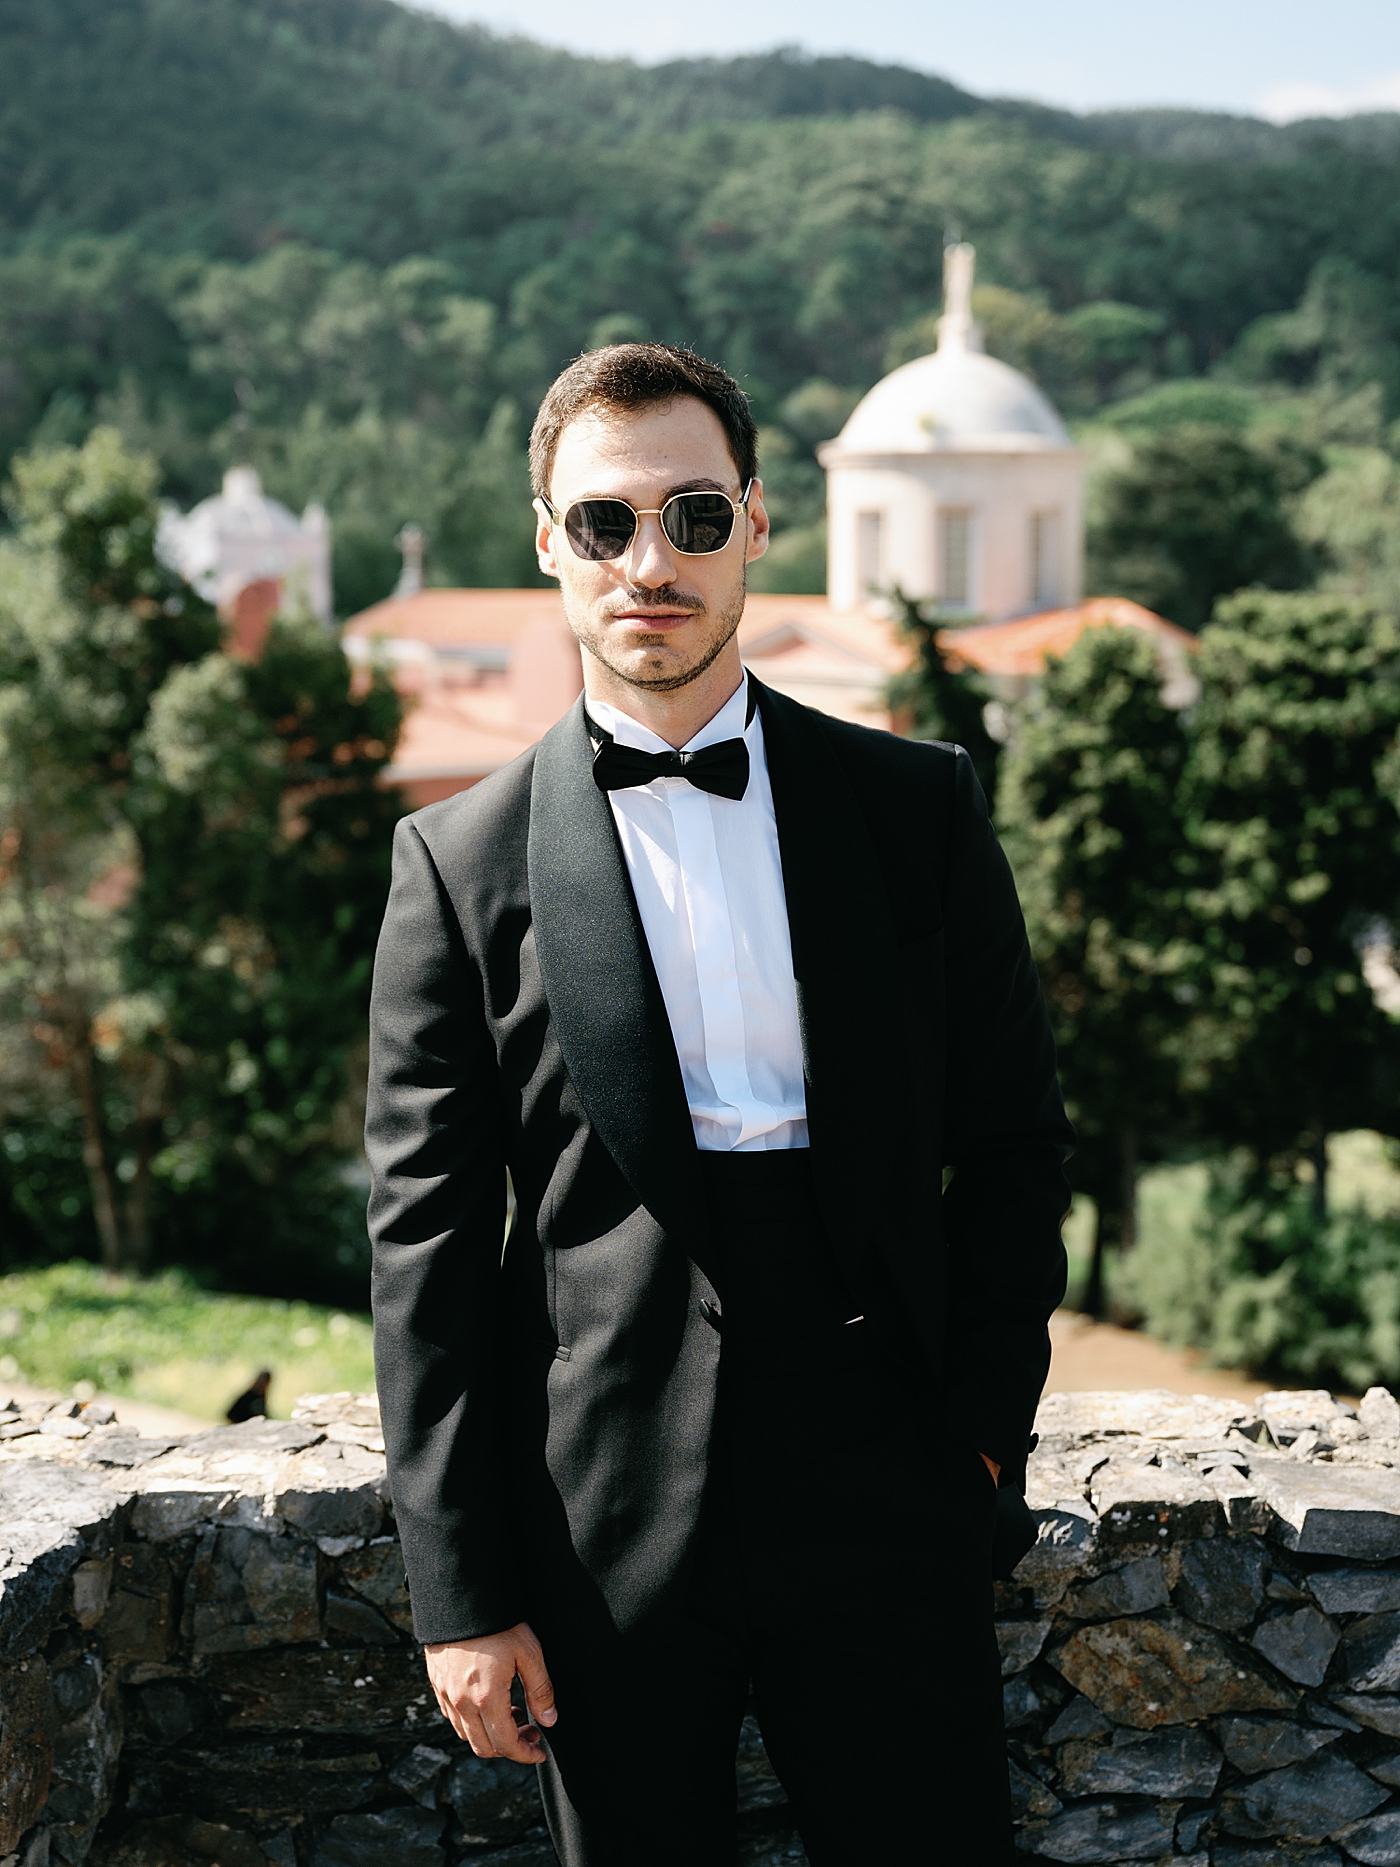 during their Ritz-Carlton Wedding in Portugal | Image by Diane Sotero 